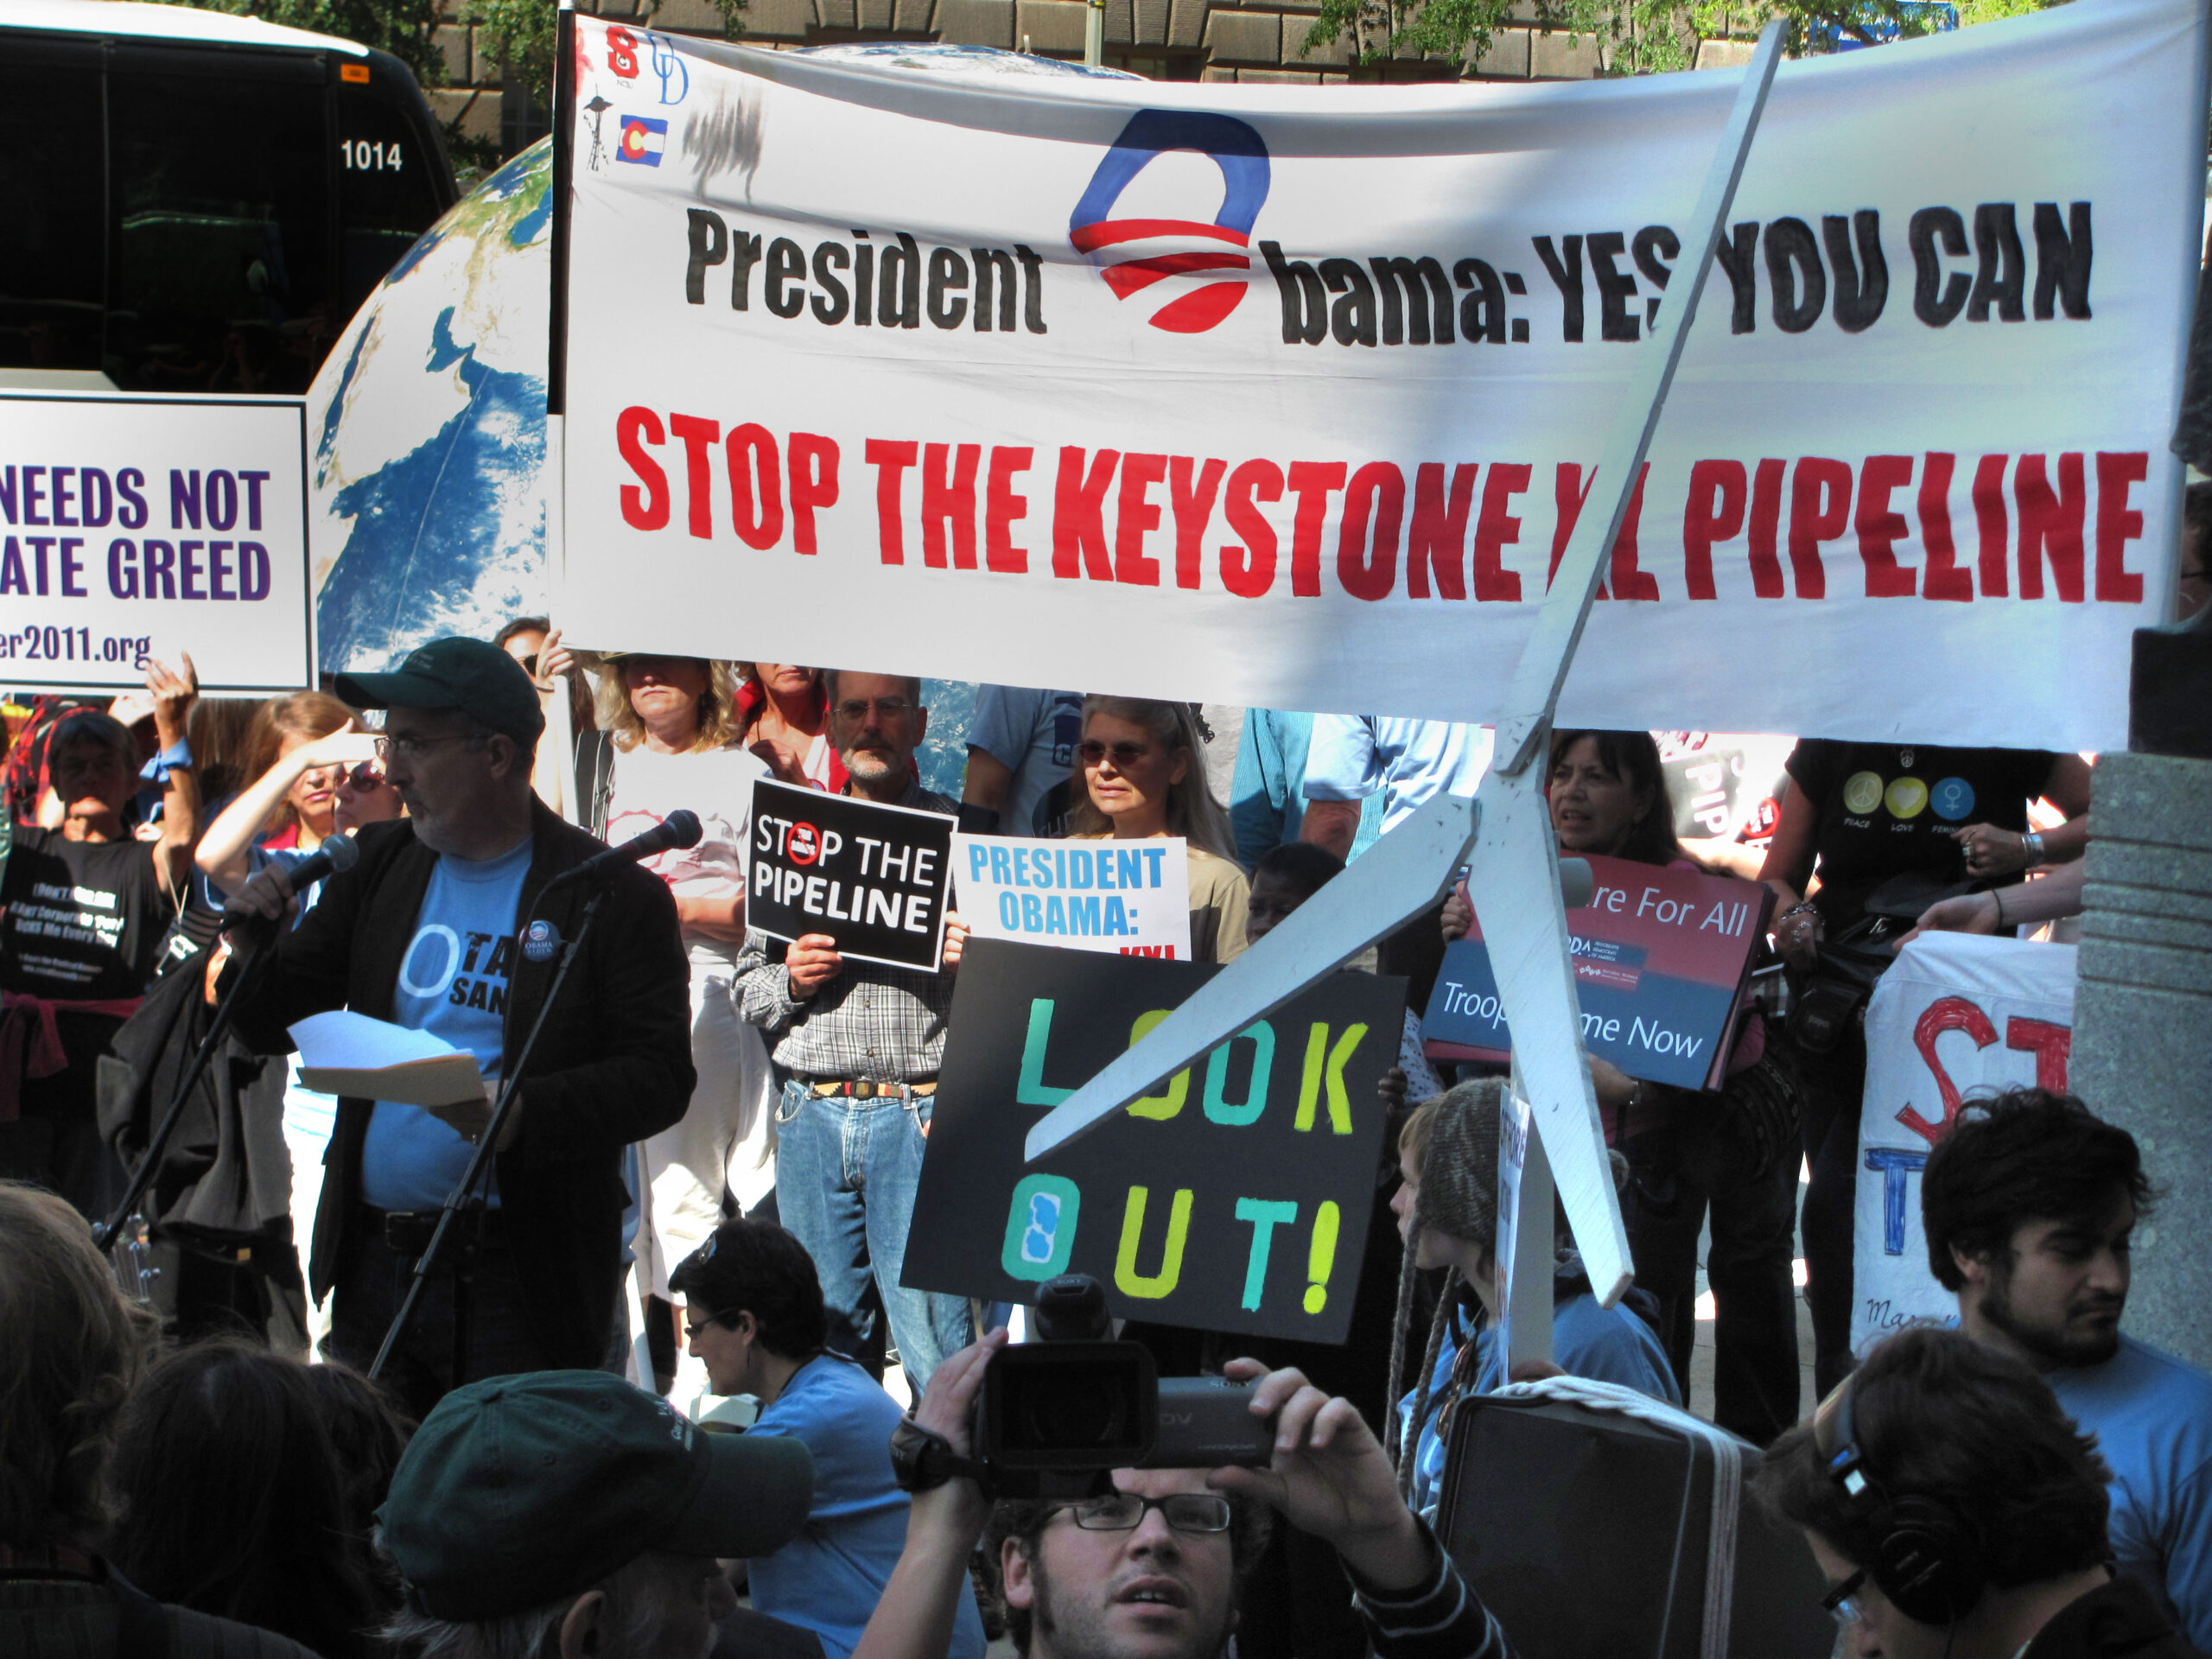 Yes, you can stop Keystone XL